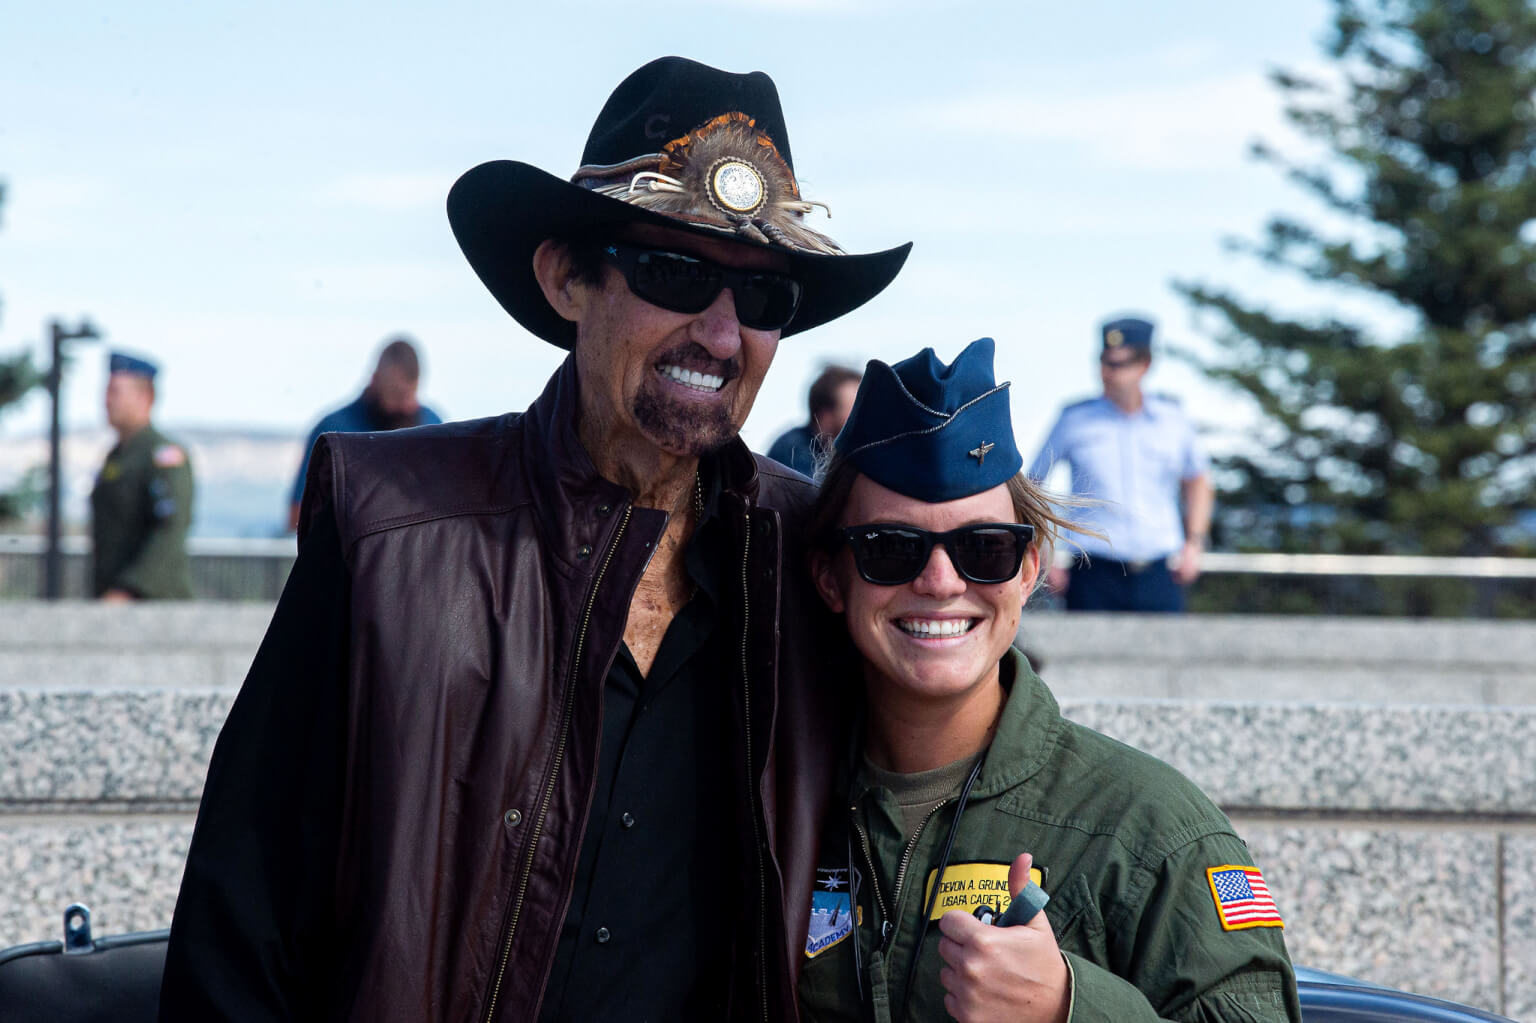 NASCAR Hall of Famer Richard Petty takes a photograph with a female cadet